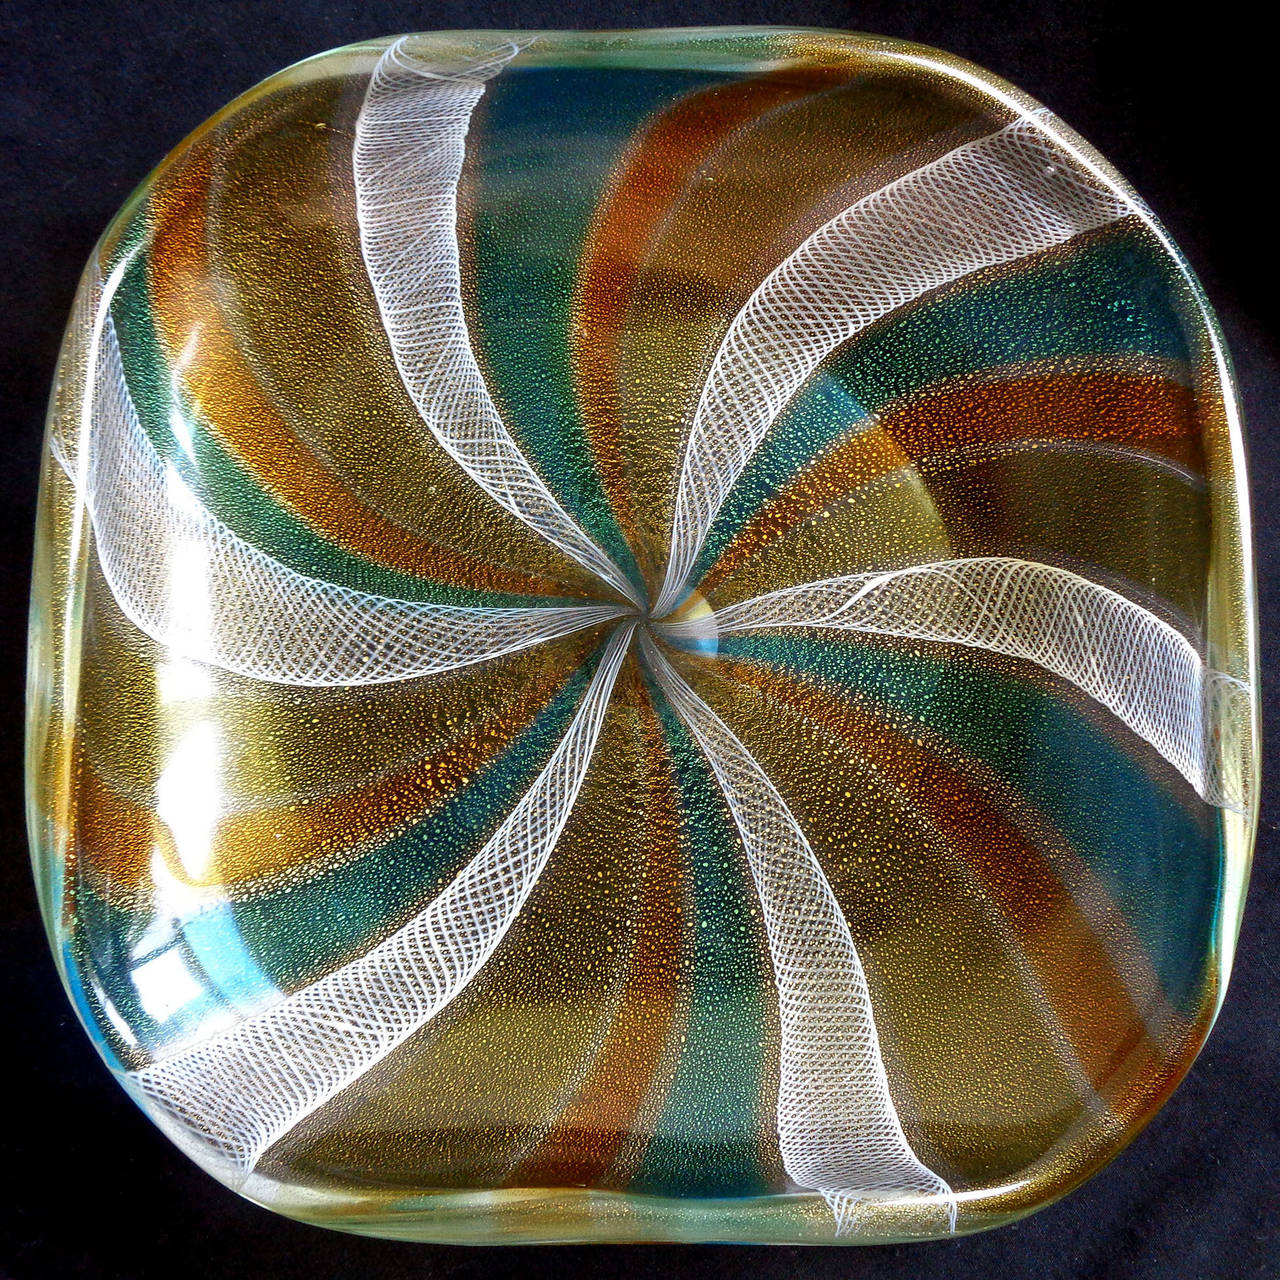 Free shipping worldwide! See details below description.

Amazing Murano handblown blue, orange and yellow pinwheel bowl with zanfirico ribbons and gold. Beautiful design, and profusely covered in gold leaf. 

Please look at my exclusive 1stdibs